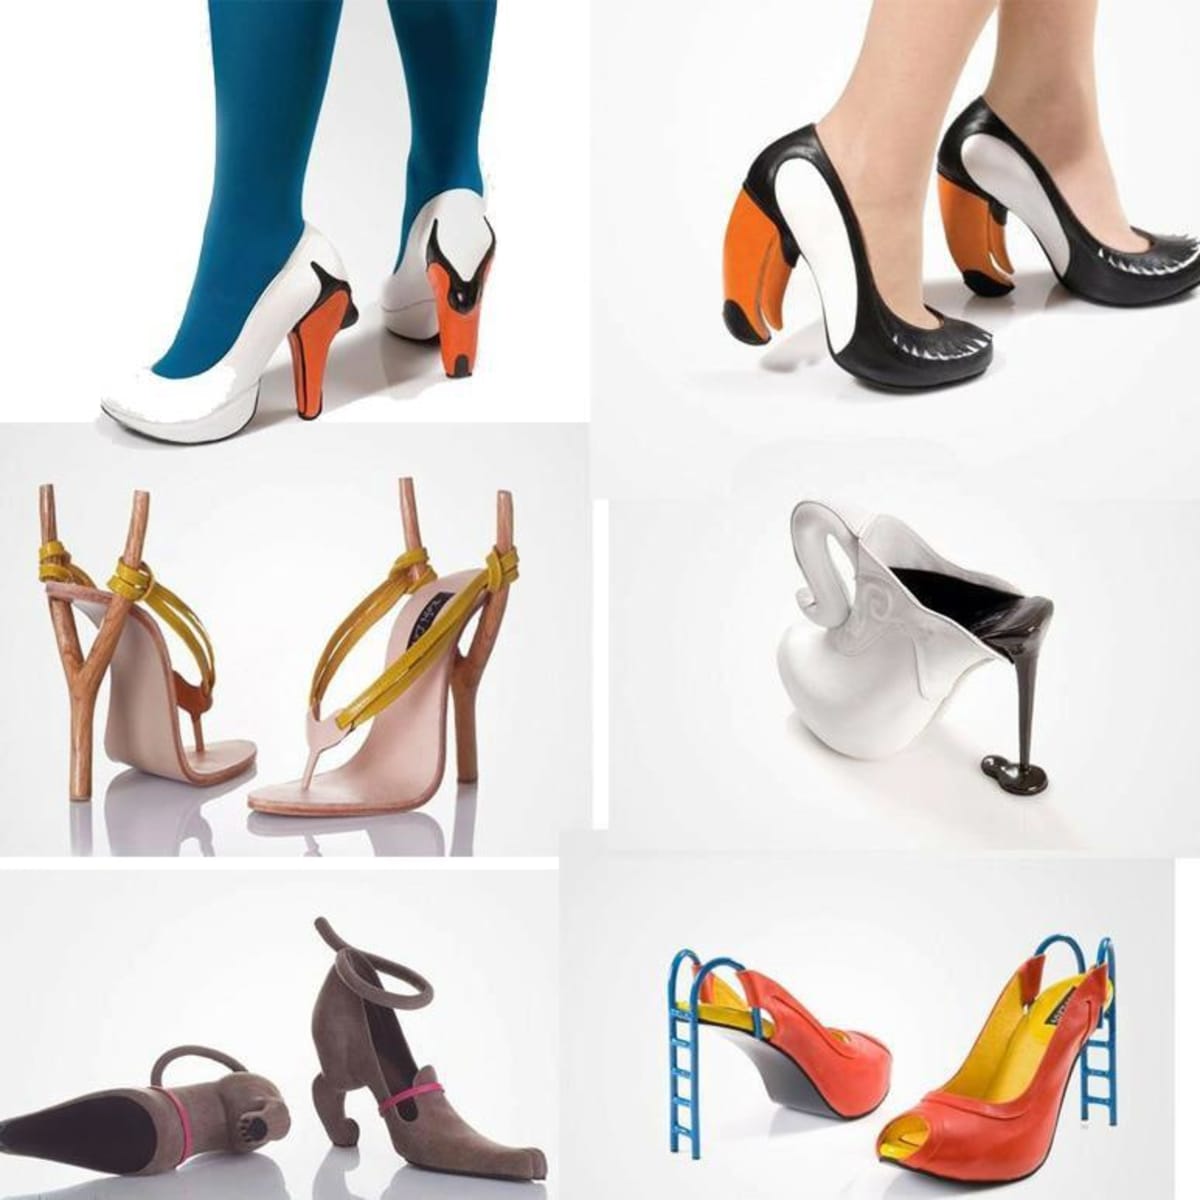 7 Tips to Wear High Heels Comfortably